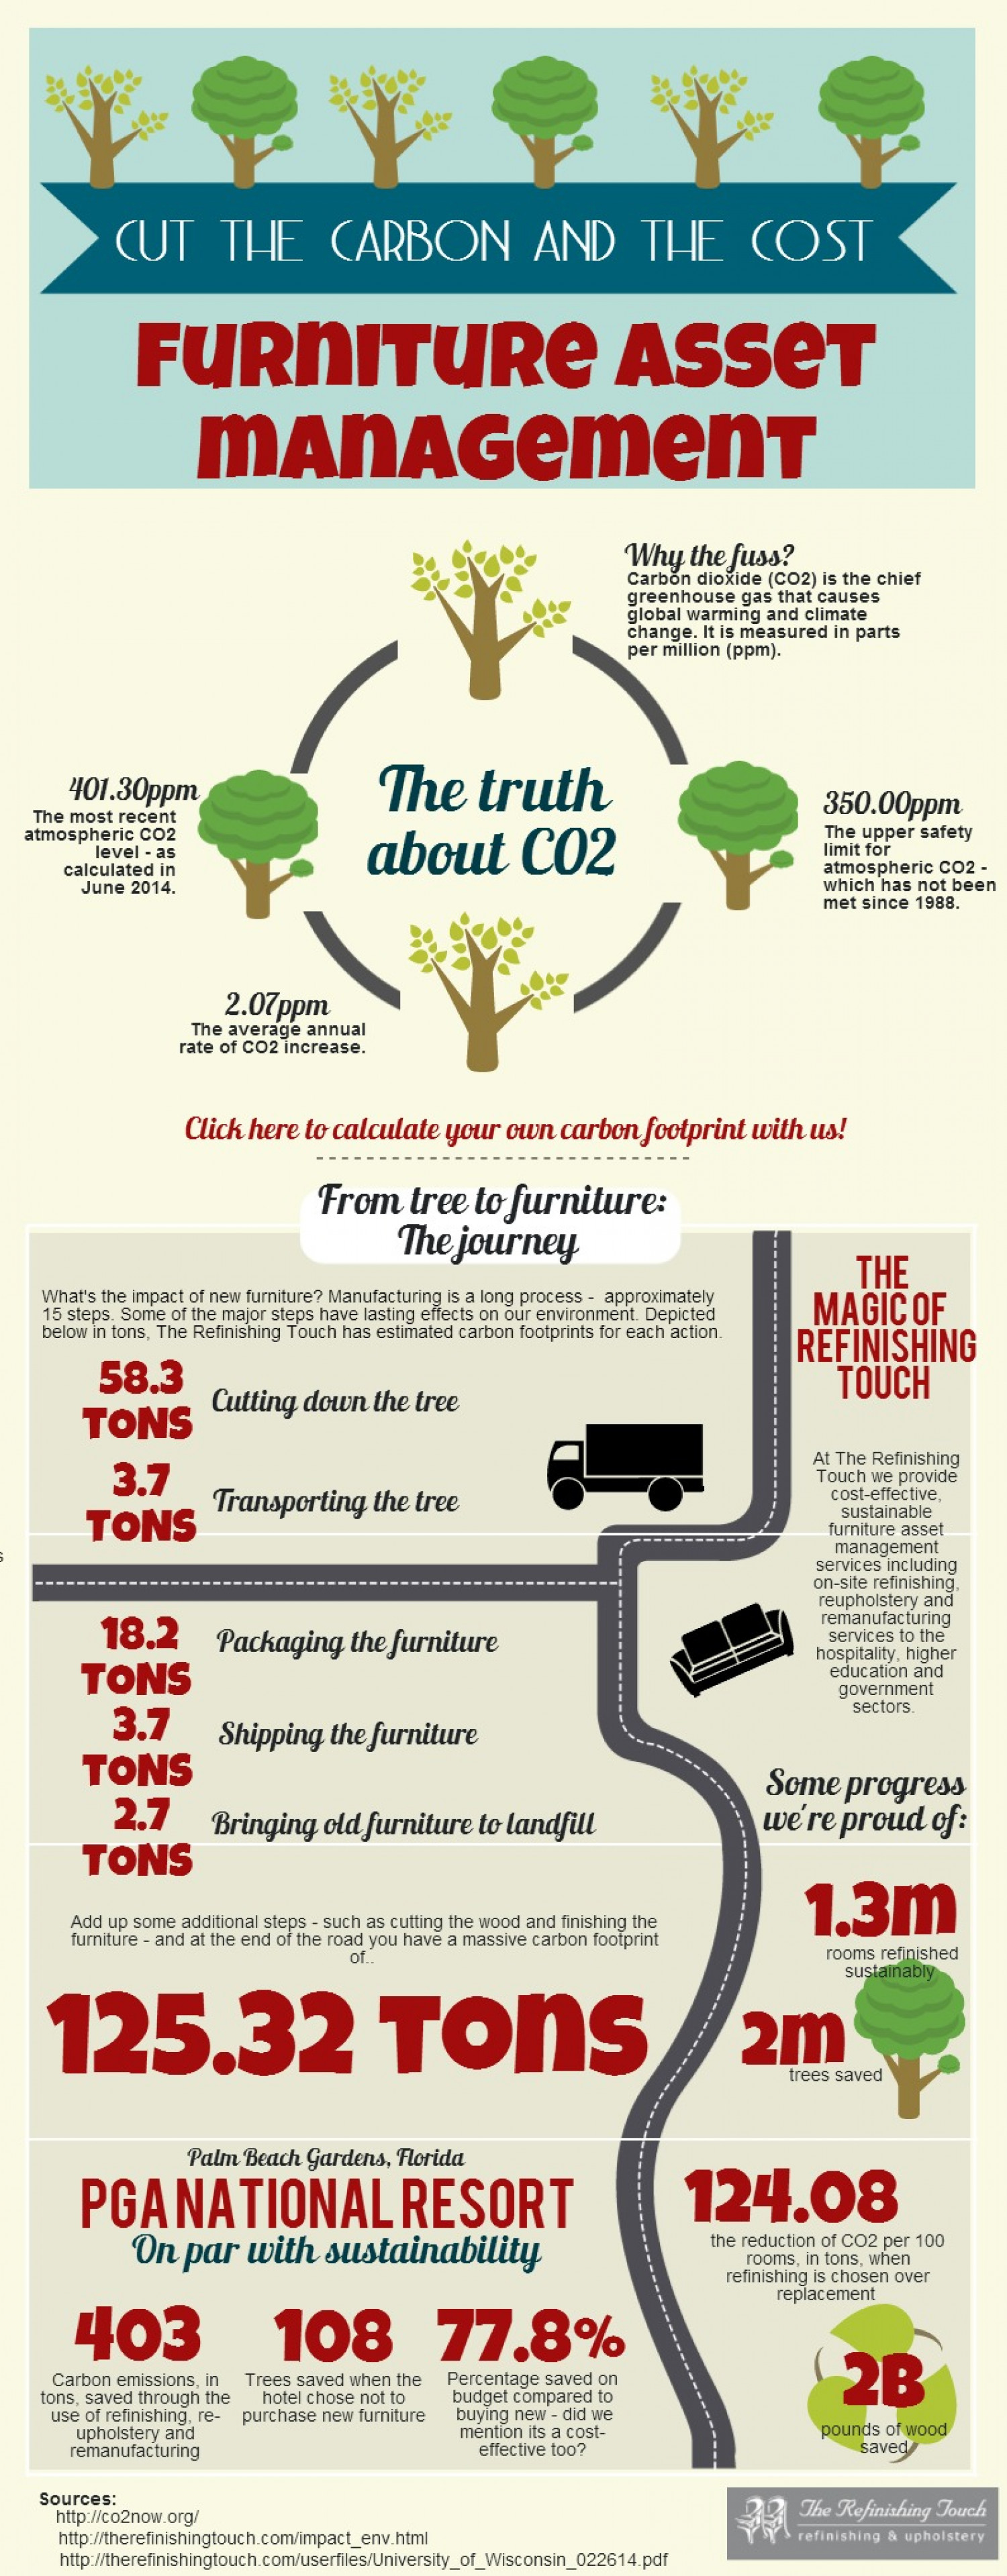 Furniture asset management: Cut the carbon and the cost Infographic